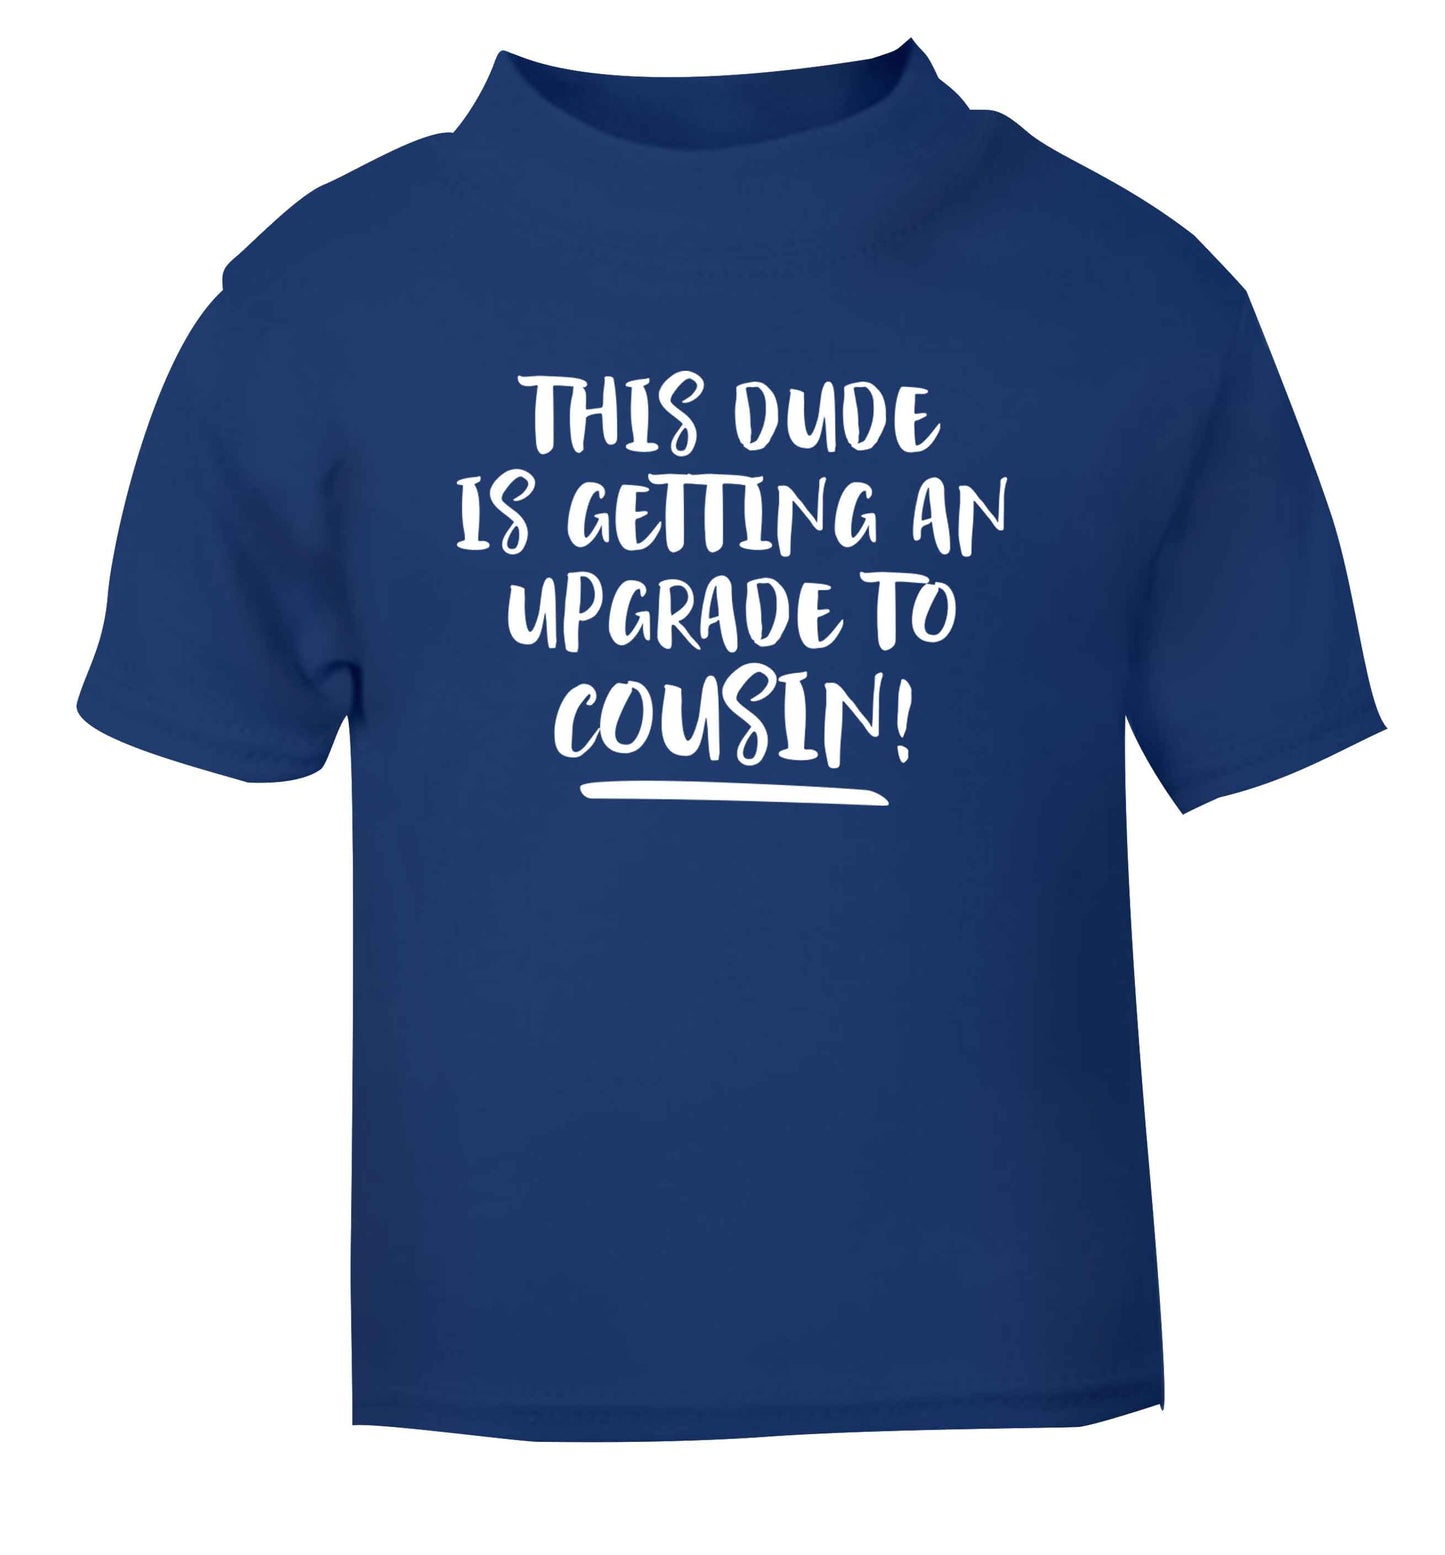 This dude is getting an upgrade to cousin! blue Baby Toddler Tshirt 2 Years